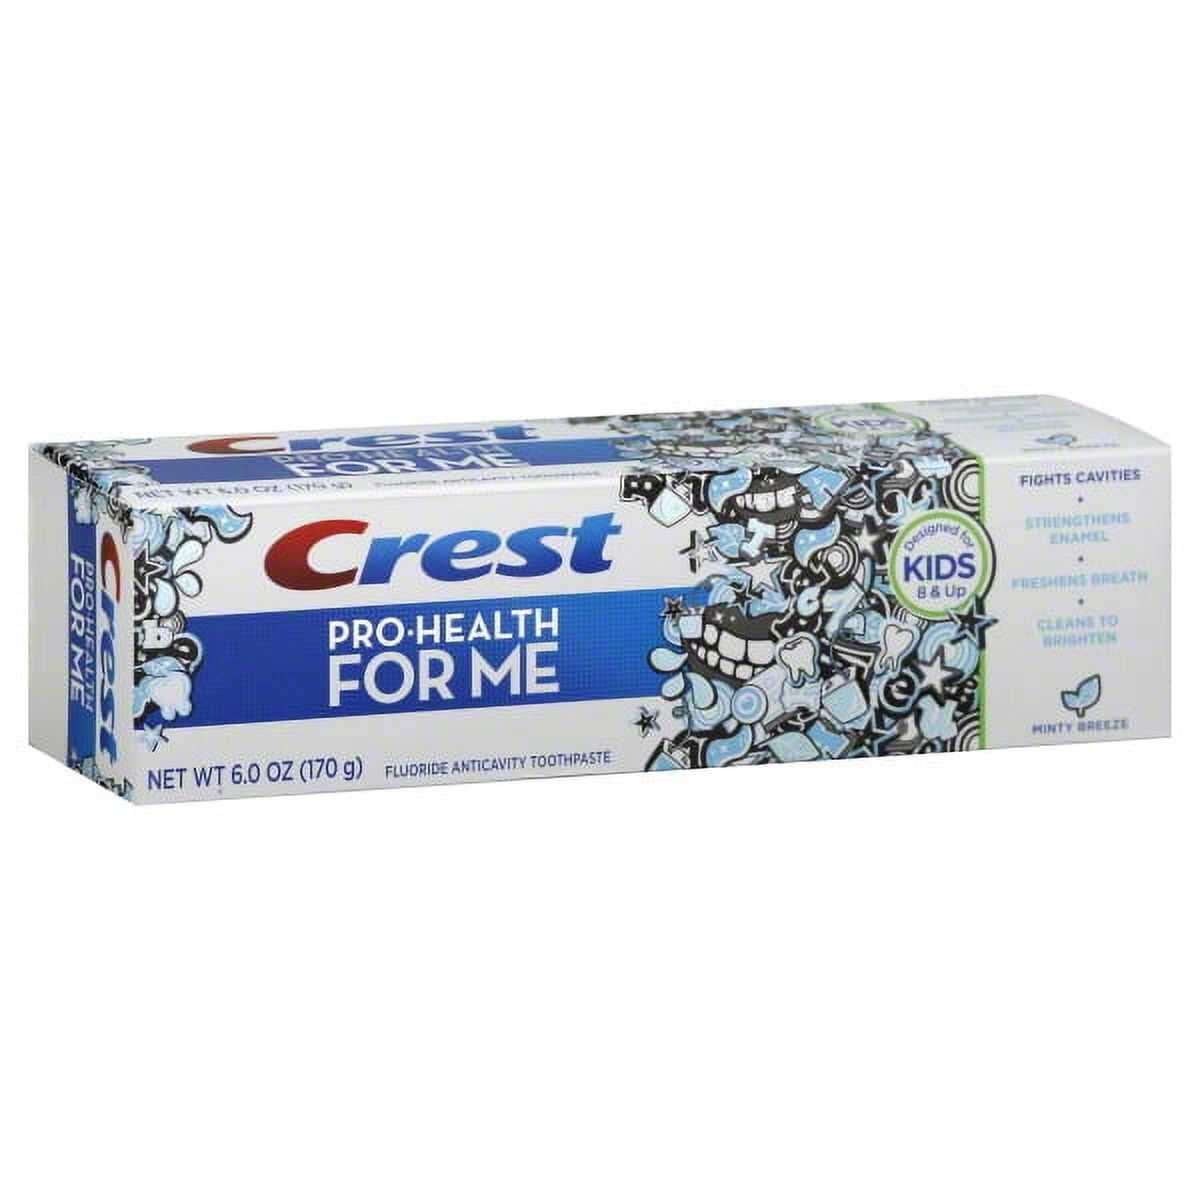 Crest Pro-Health For Me Fluoride Anticavity, Minty Breeze 6 oz - image 1 of 4